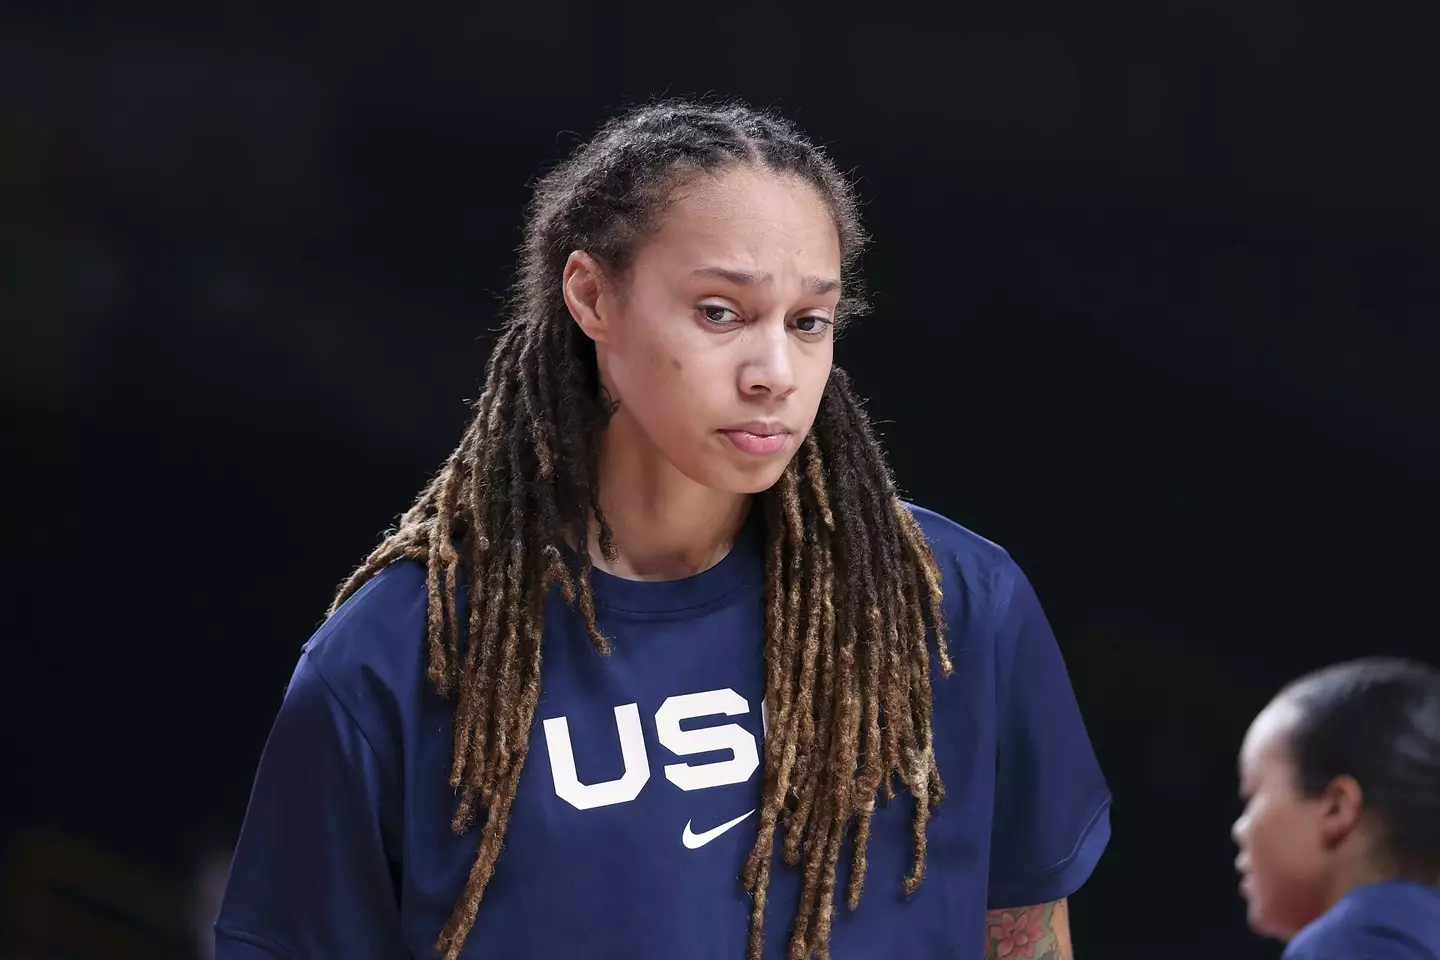 Griner has insisted she did not intend to commit a crime.